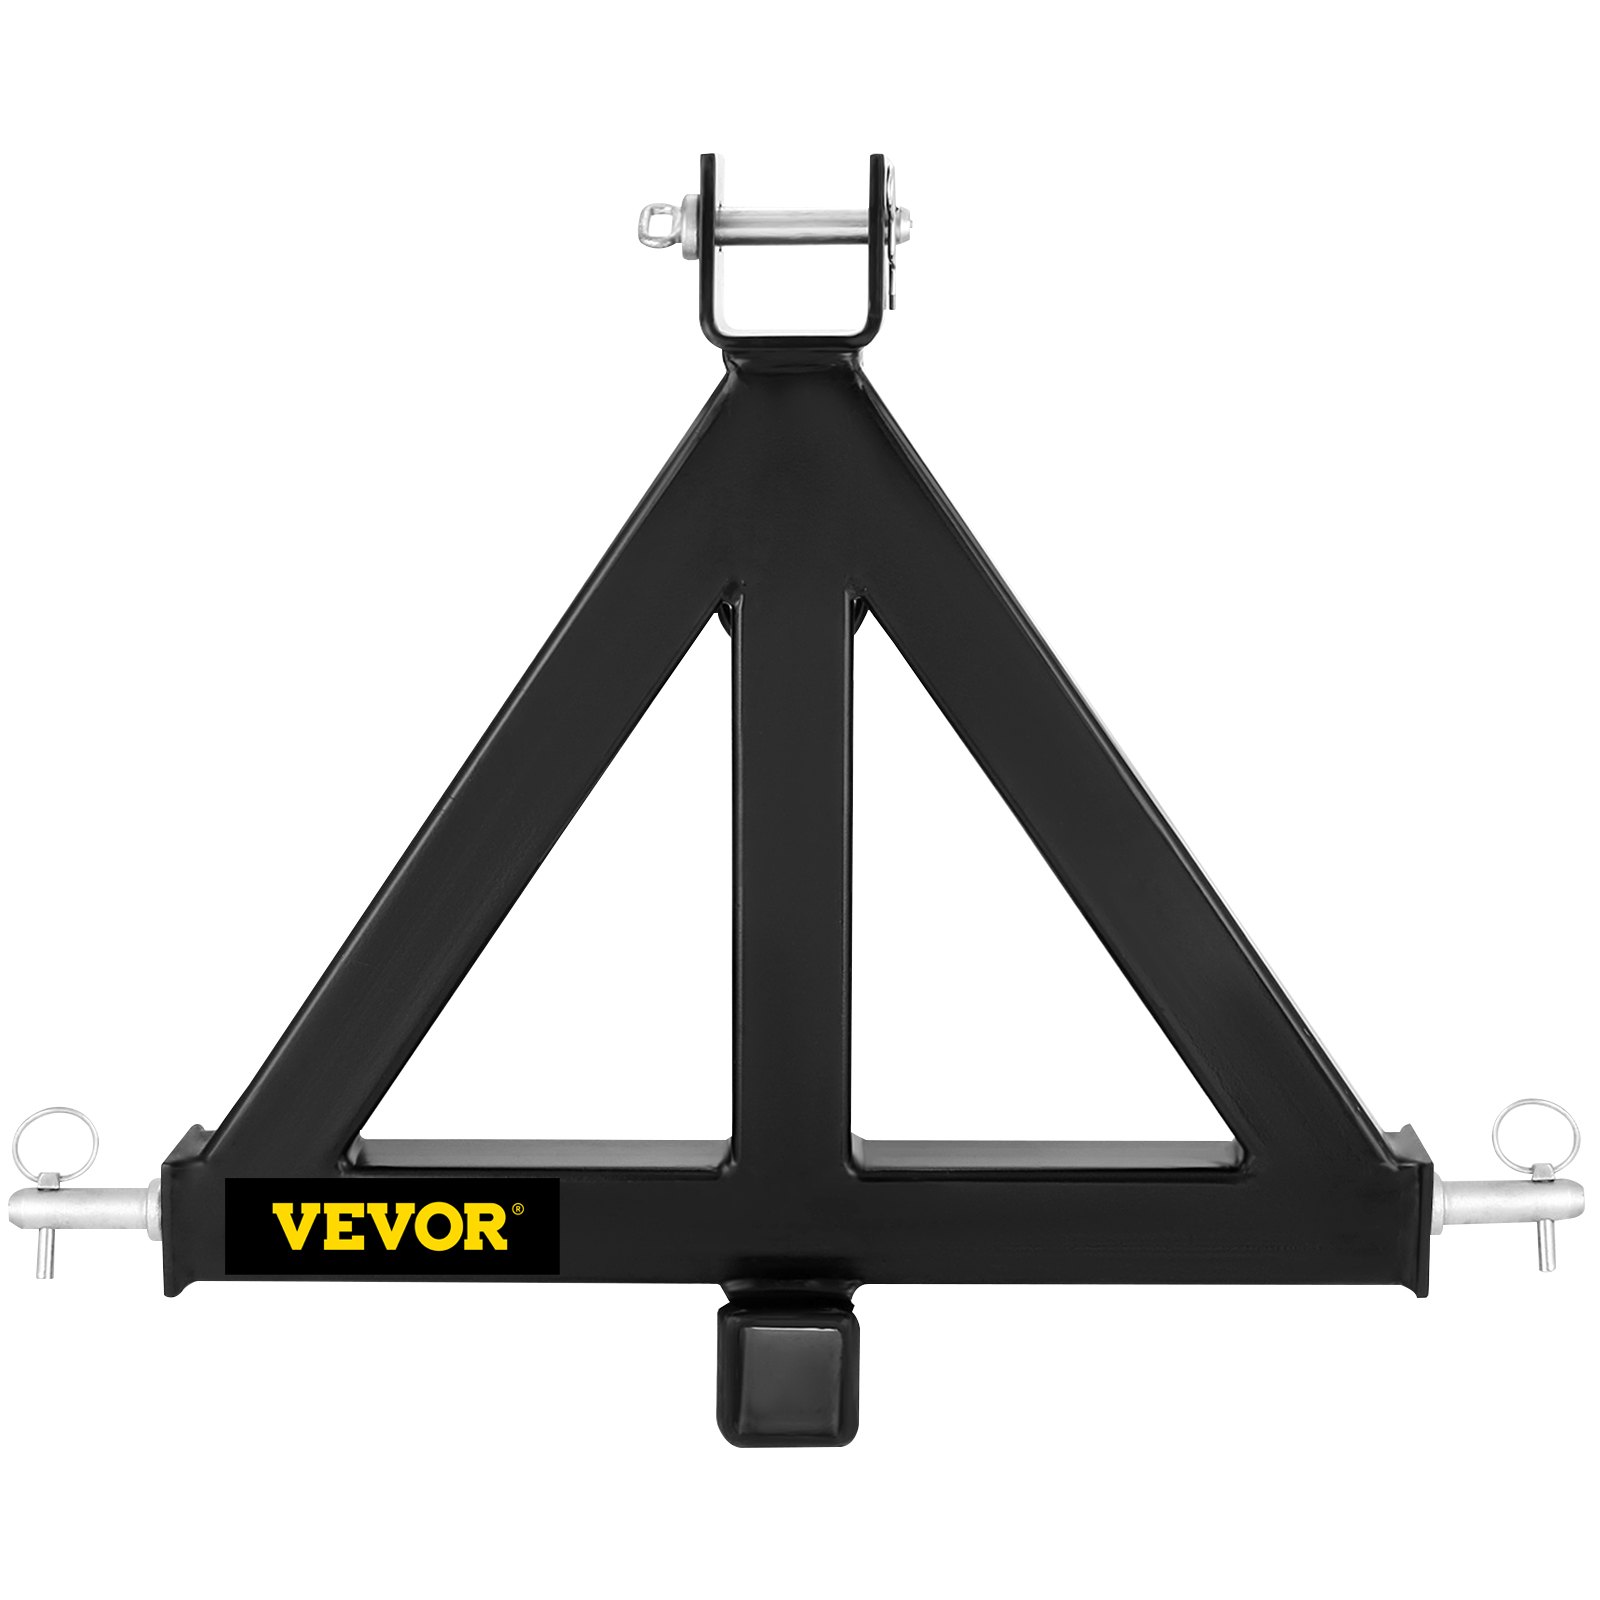 VEVOR 3 Point Trailer Hitch Heavy Duty 2In Receiver Hitch Category 1 ...